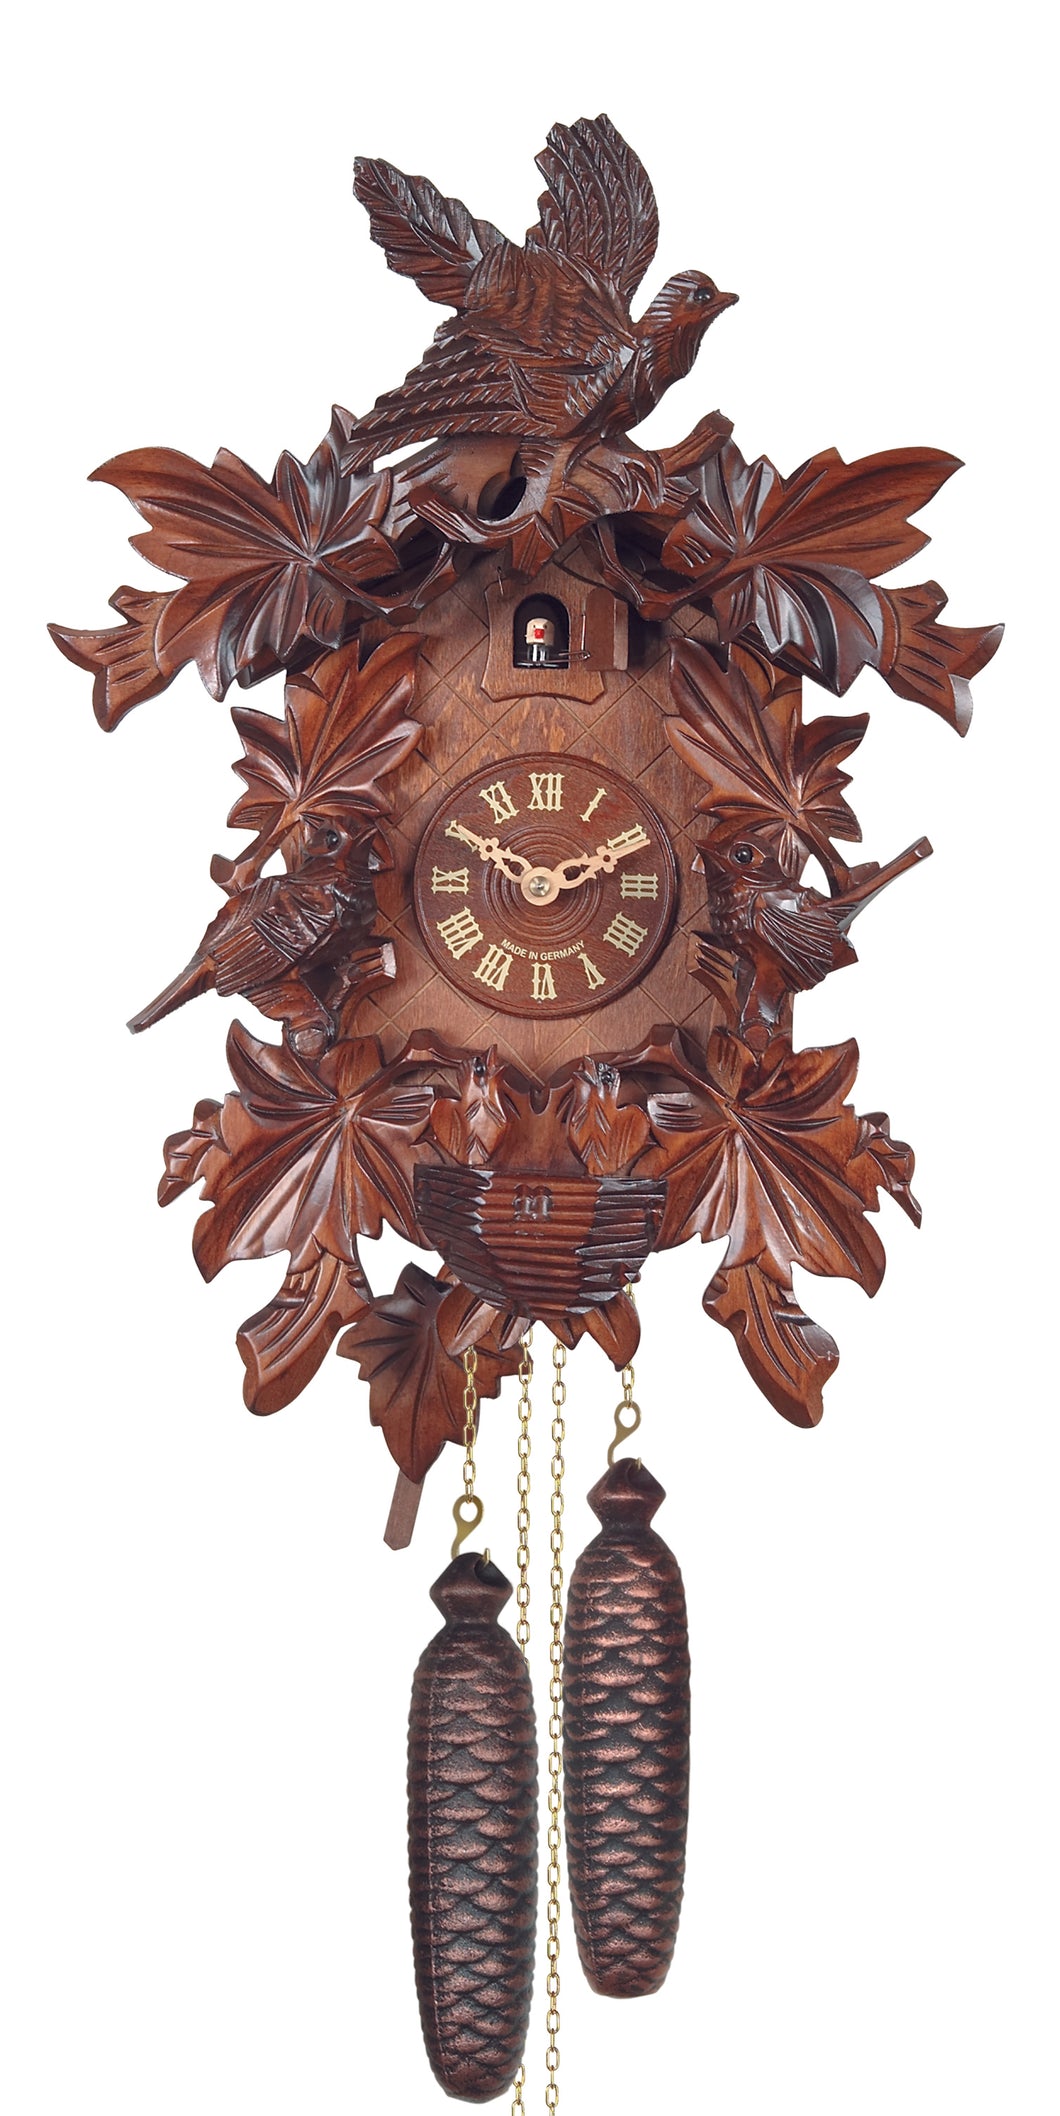 NEW - Traditional “Birds Nest” Cuckoo Clock with Eight Day Movement